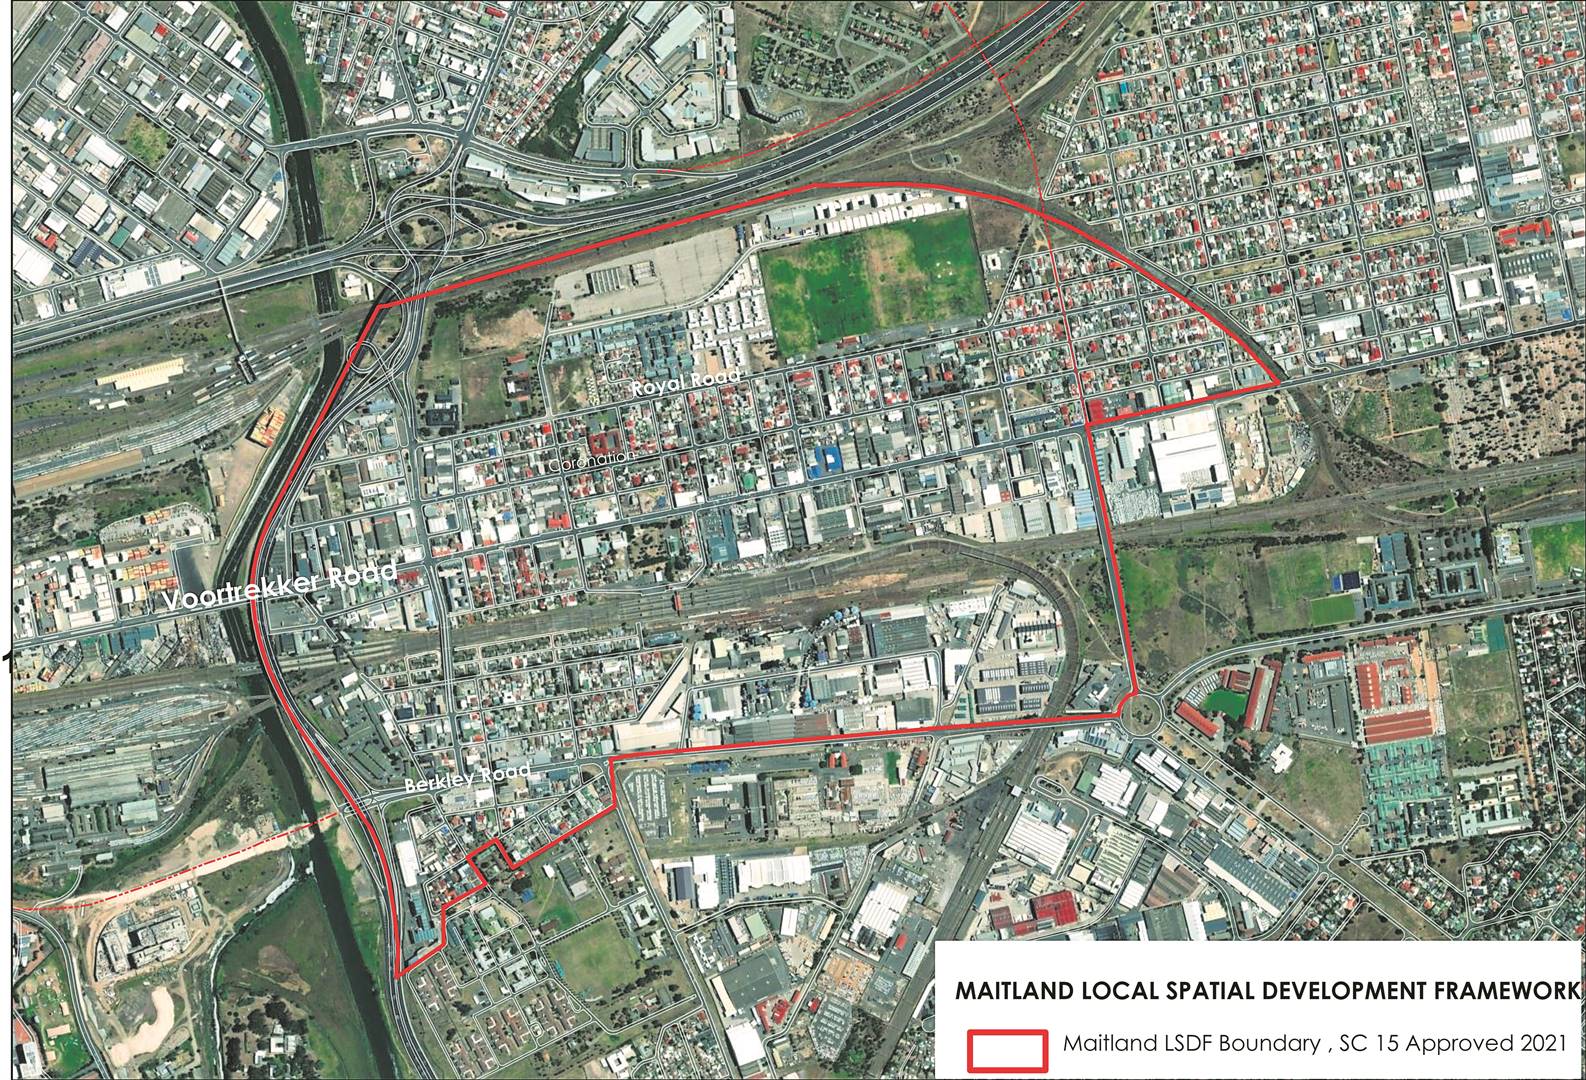 The map indicates the boundaries for the Maitland local spatial development framework that has been approved by Council.PHOTO: Supplied